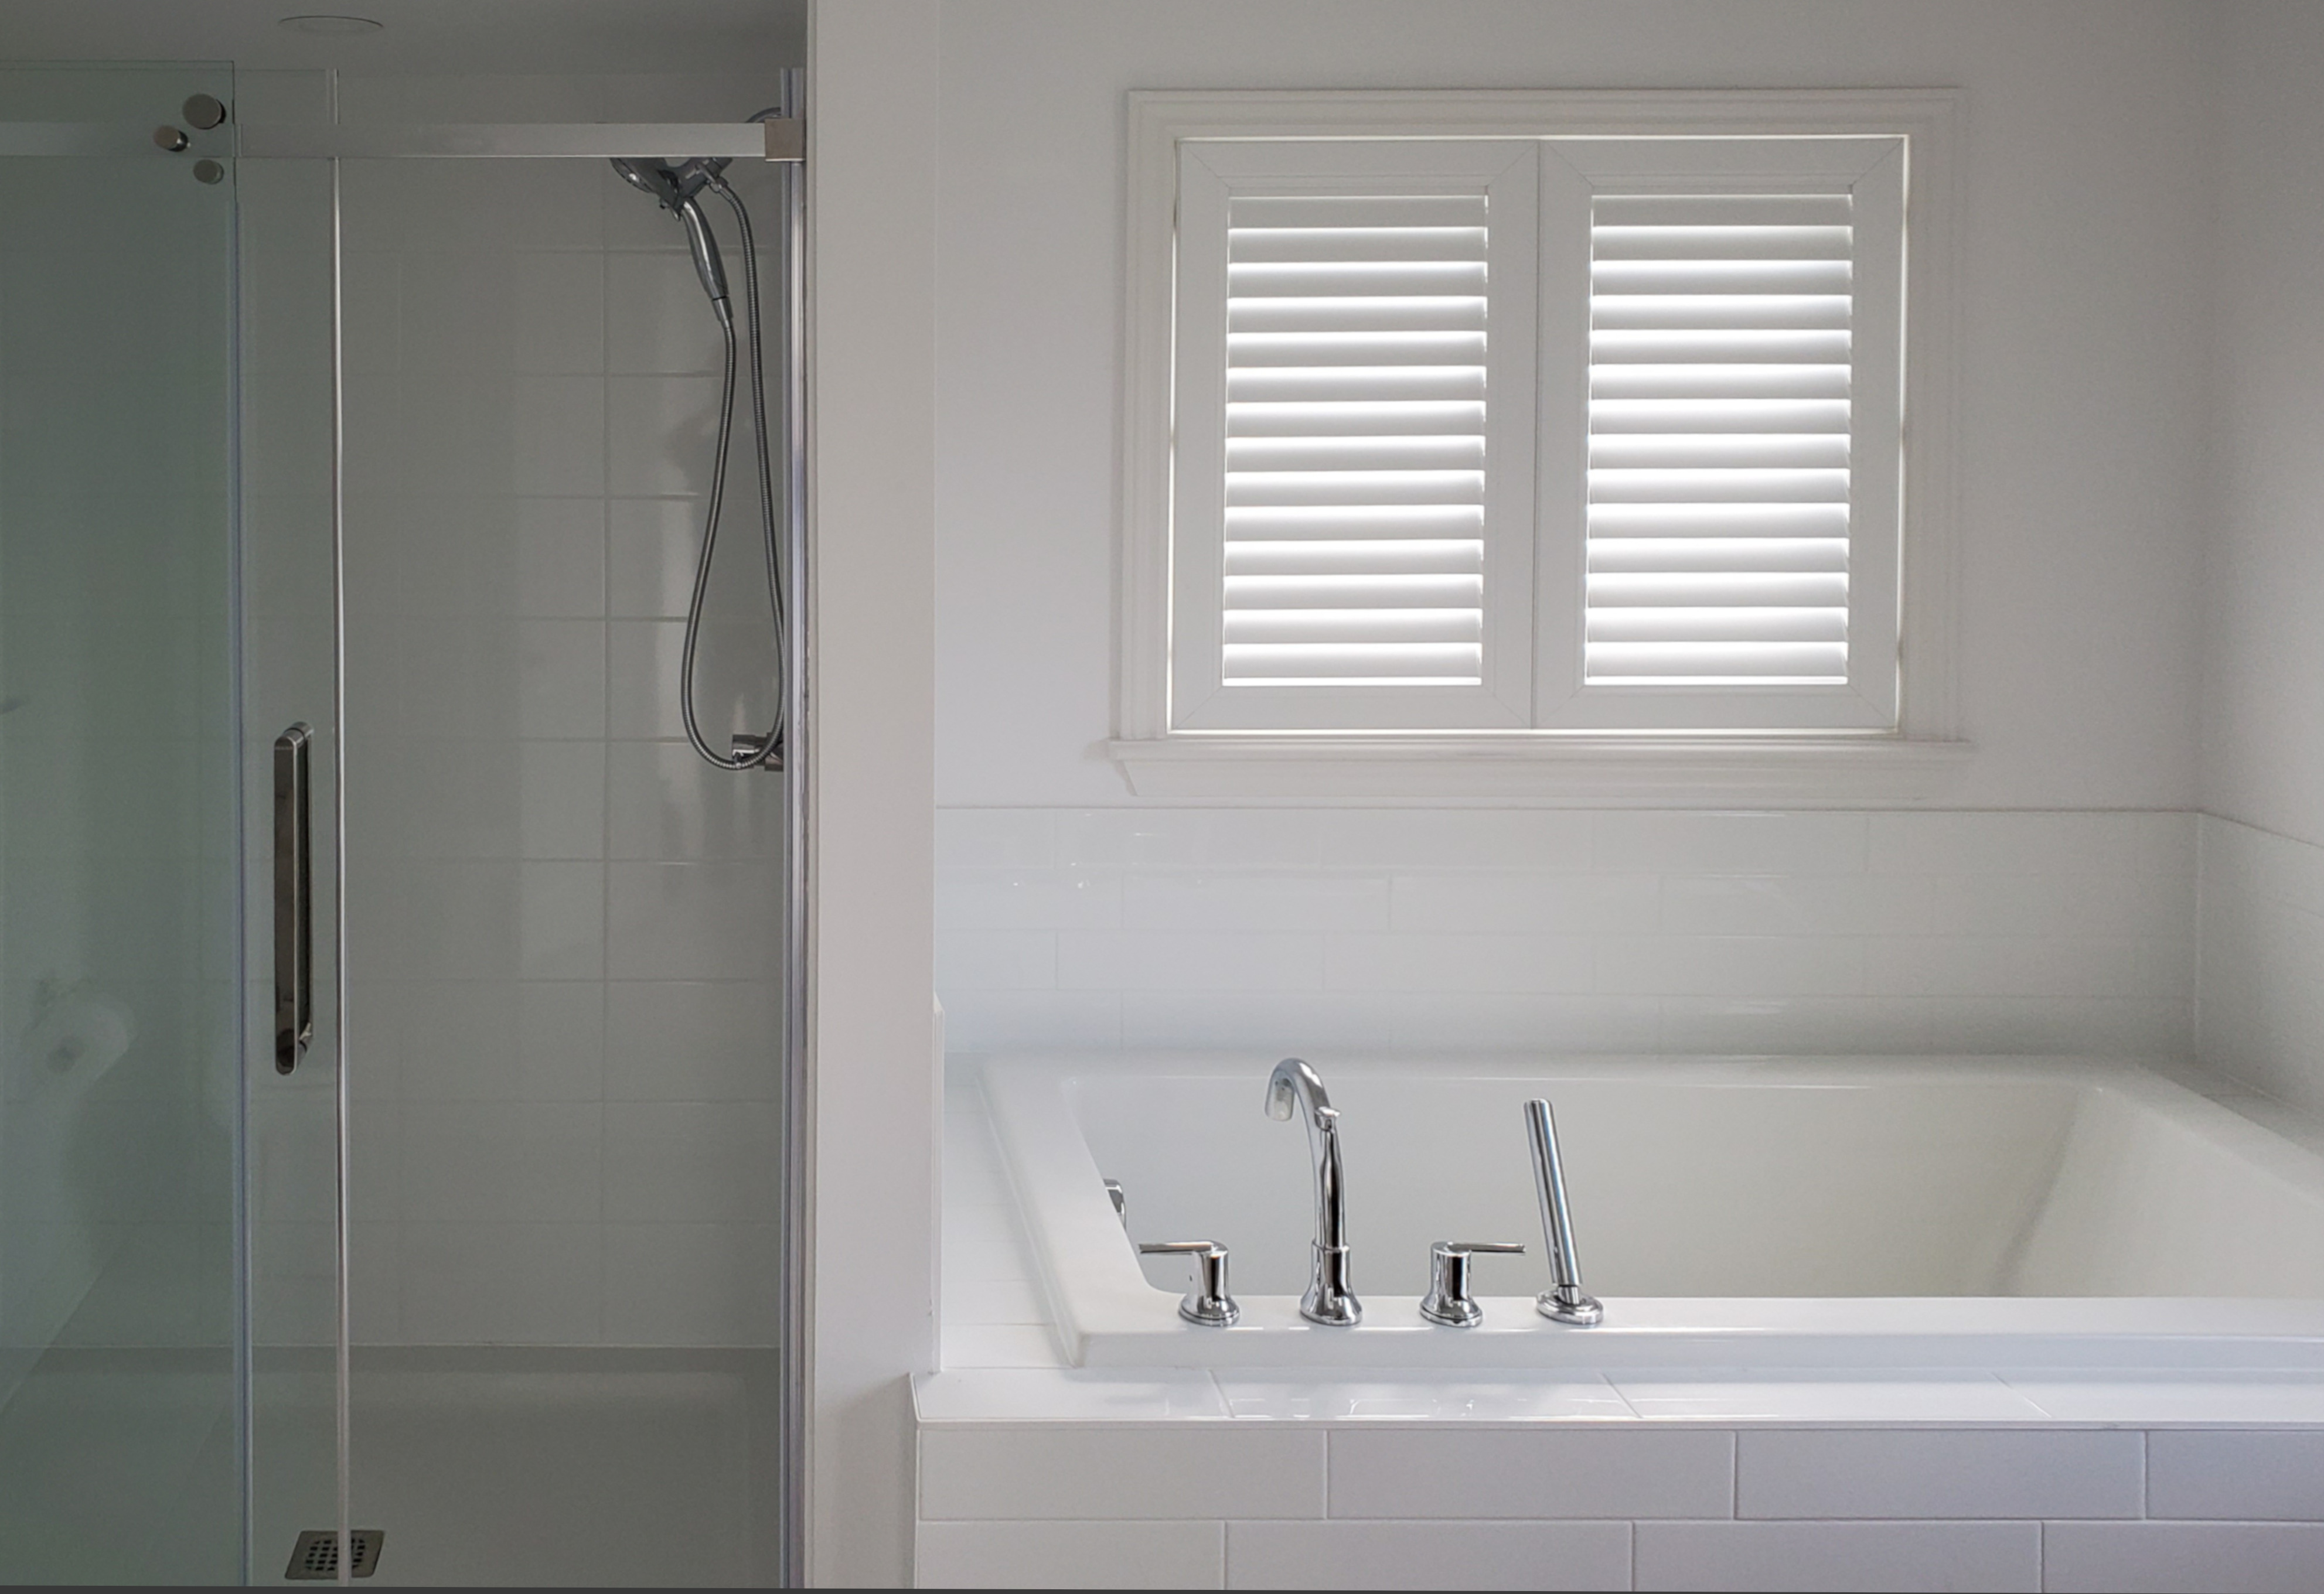 Shutters cover a small window above a standard tub in a bathroom.